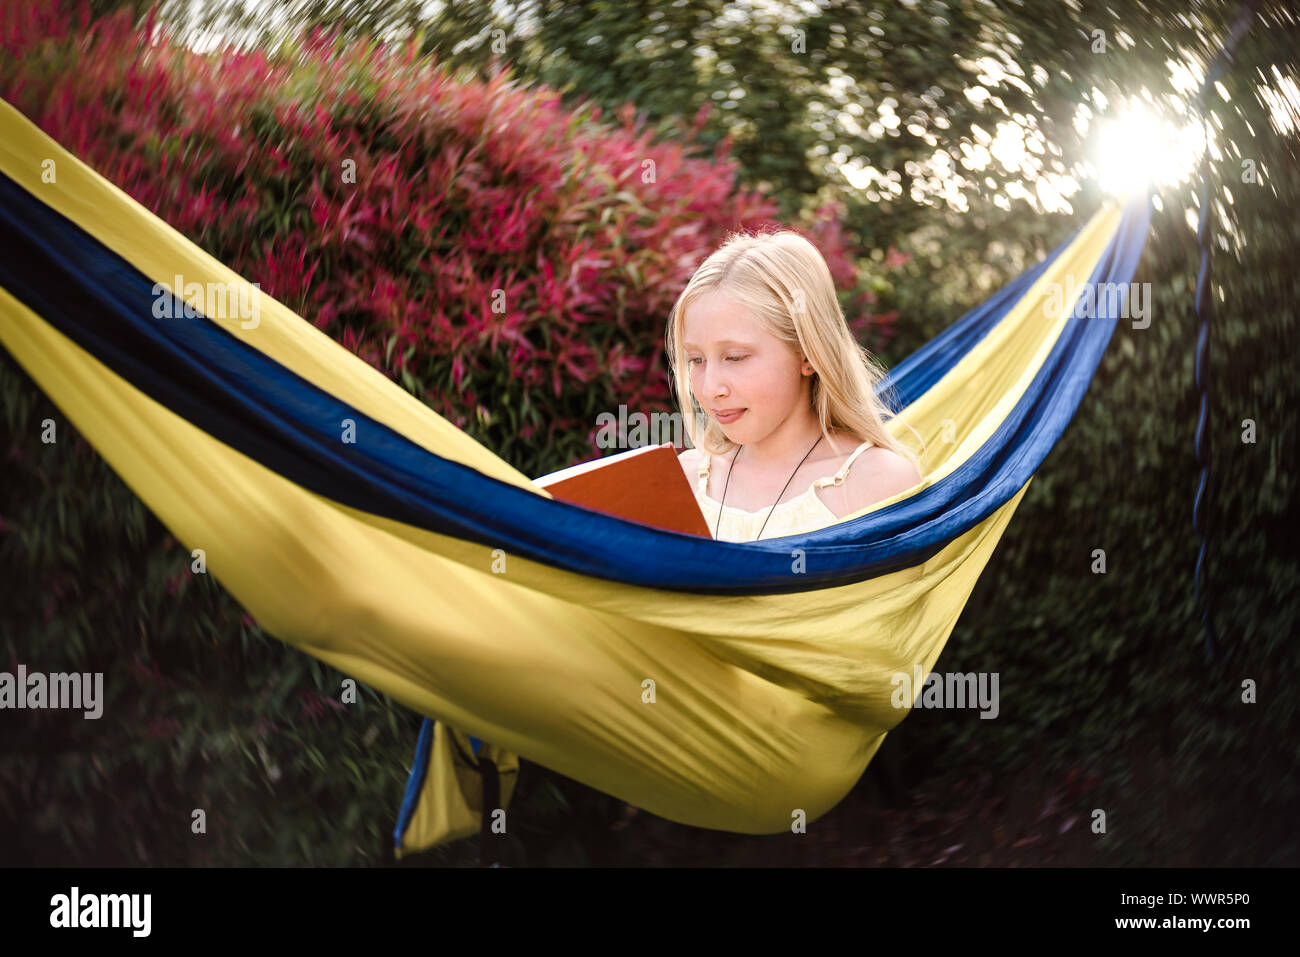 Adolescent girl reading in a yellow hammock Stock Photo